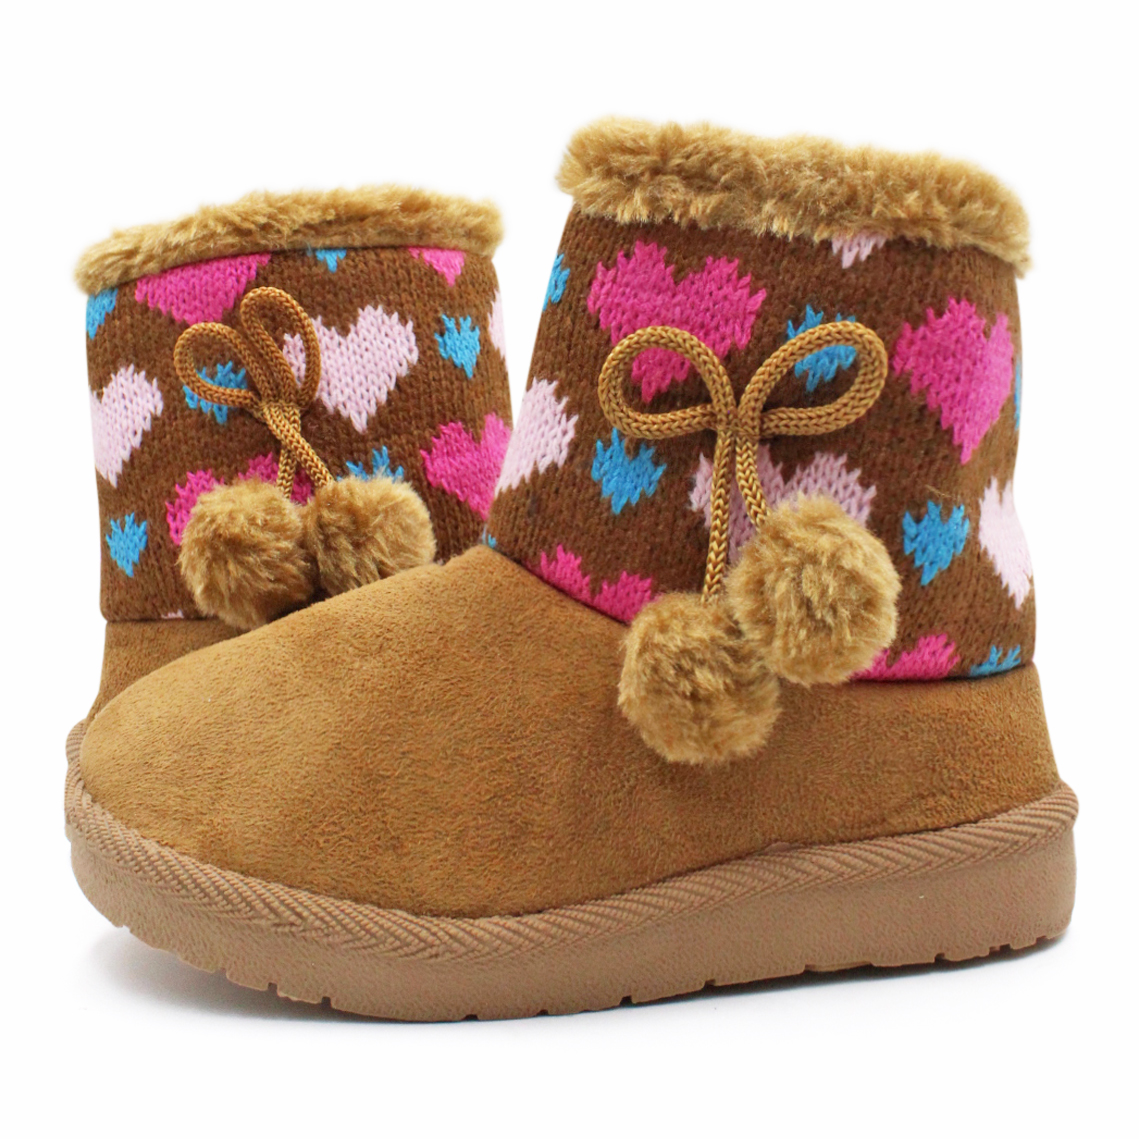 LAVRA Girls Classic Booties Faux Fur Lined Winter Snow Boots - image 5 of 6